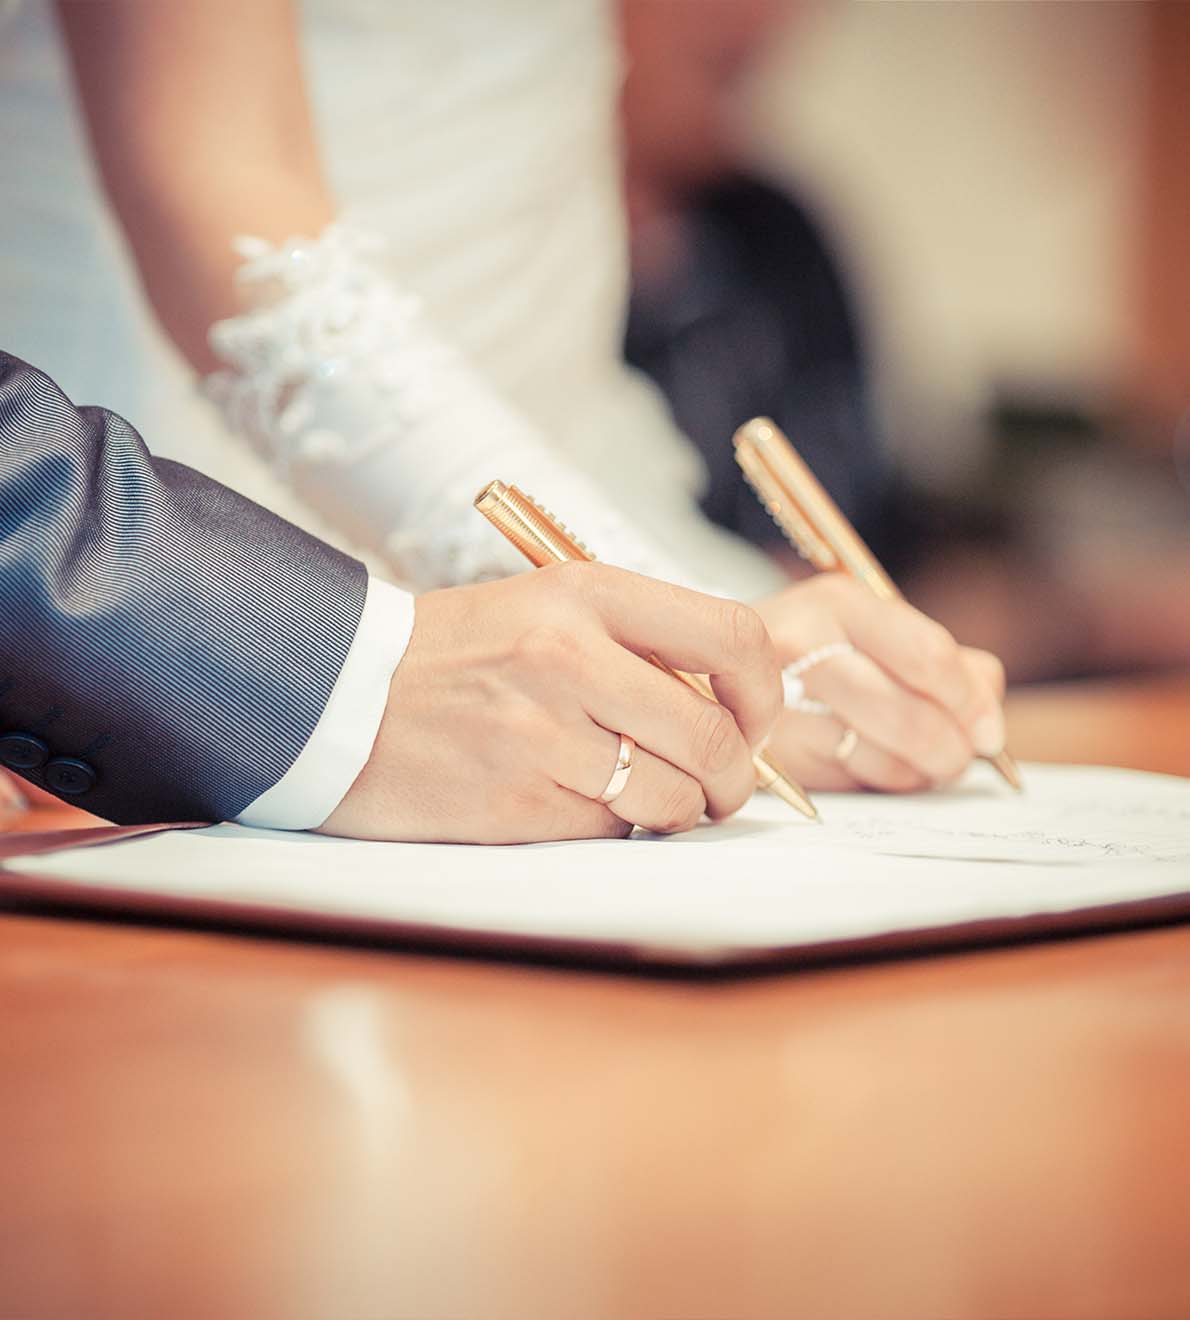 Image of a couple signing their wedding documents, illustrating the important step of legal paperwork in the wedding process, featured on Ash Reynolds' site.